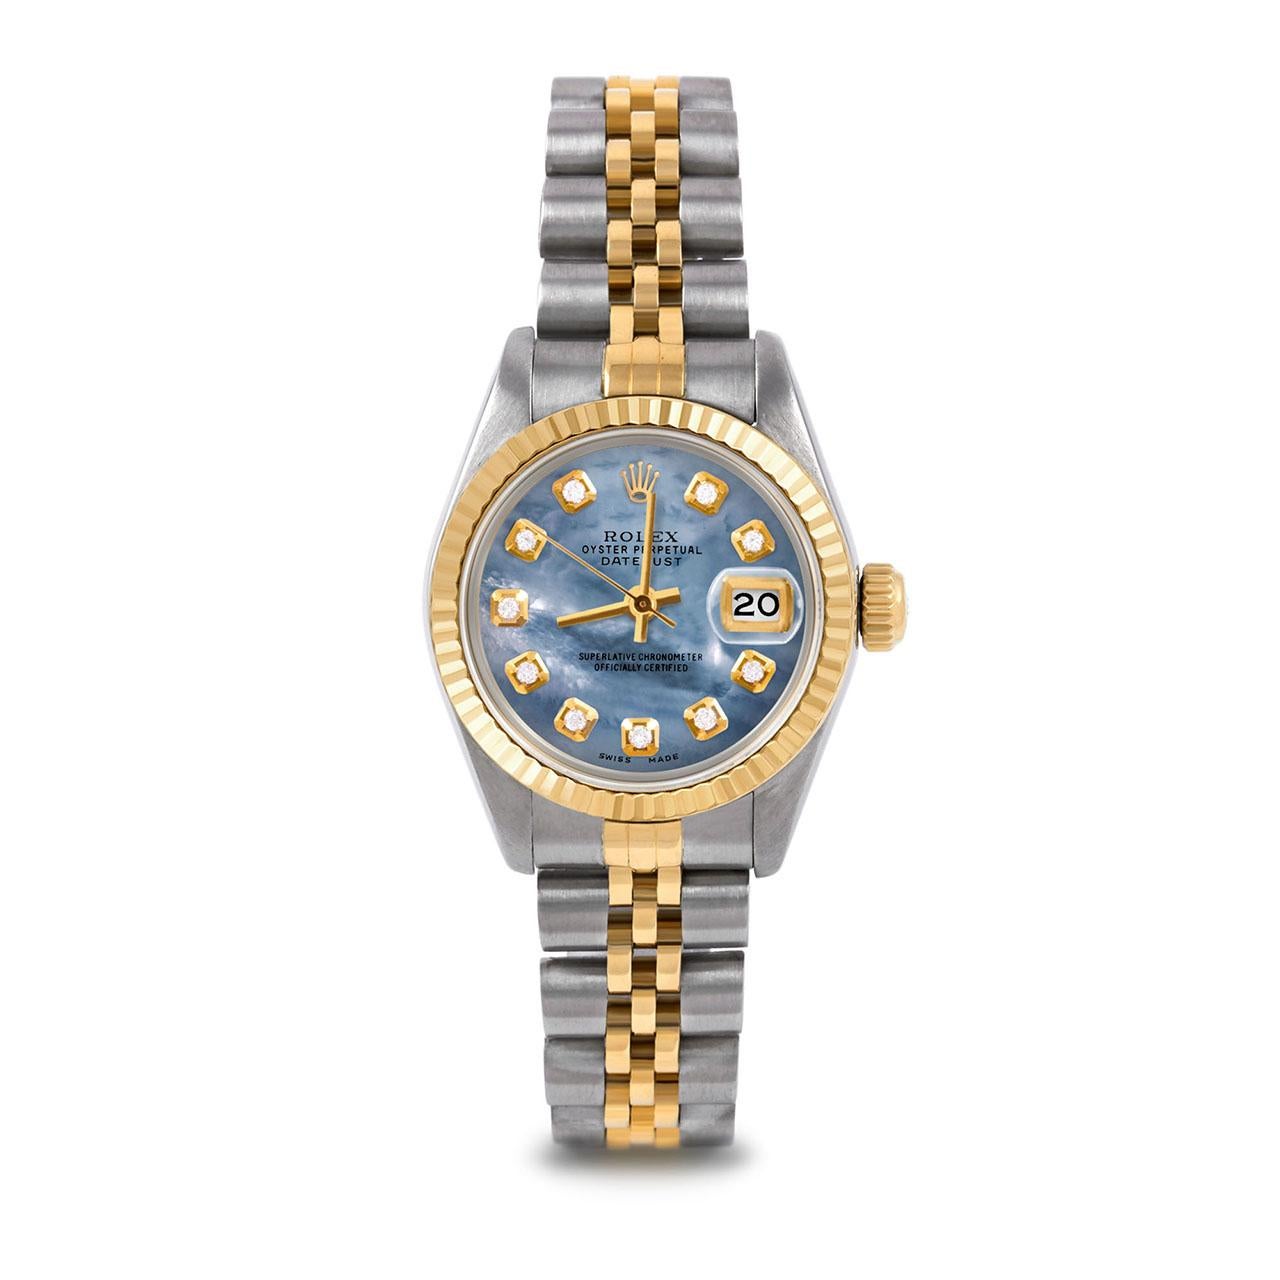 Pre-Owned Rolex 6917 Ladies 26mm Two Tone Datejust Watch, Custom Blue Mother of Pearl Diamond Dial & Fluted Bezel on Rolex 14K Yellow Gold And Stainless Steel Jubilee Band.   

SKU 6917-TT-BLMOP-DIA-AM-FLT-JBL


Brand/Model:        Rolex